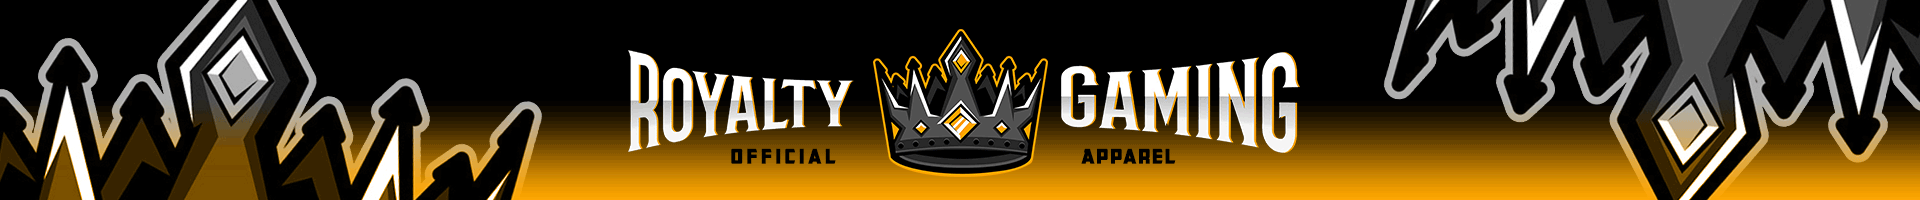 Royalty Gaming Official Merchandise - Exclusively at